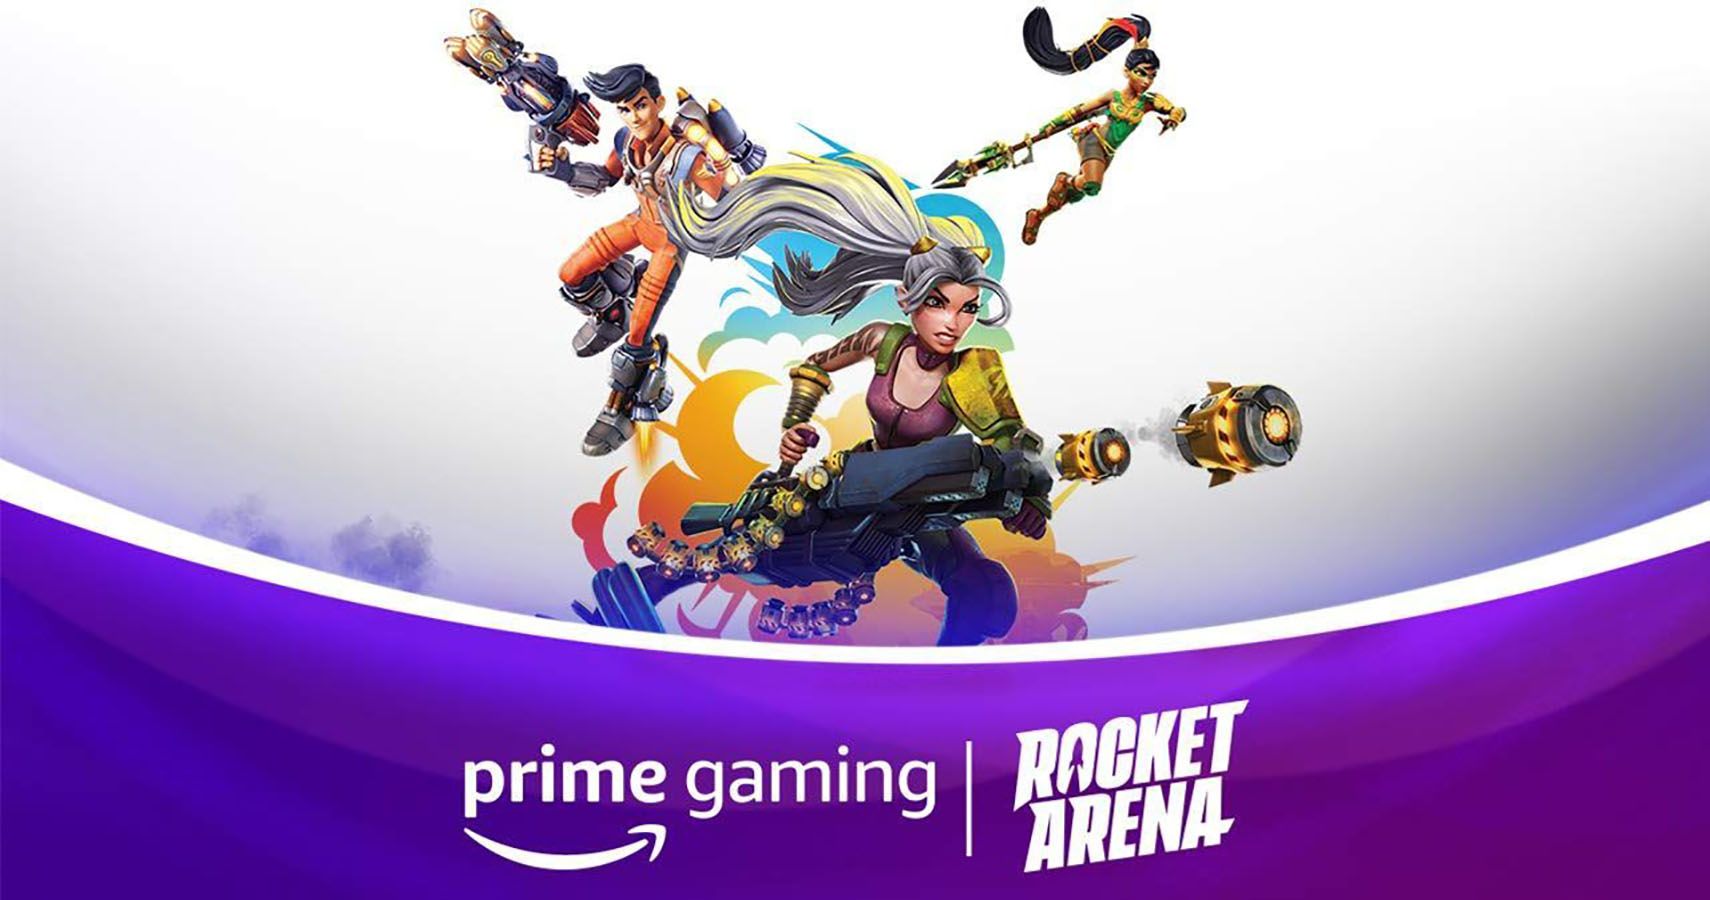 Prime Gaming Subscribers Can Pick Up New Apex Legends And Rocket Arena